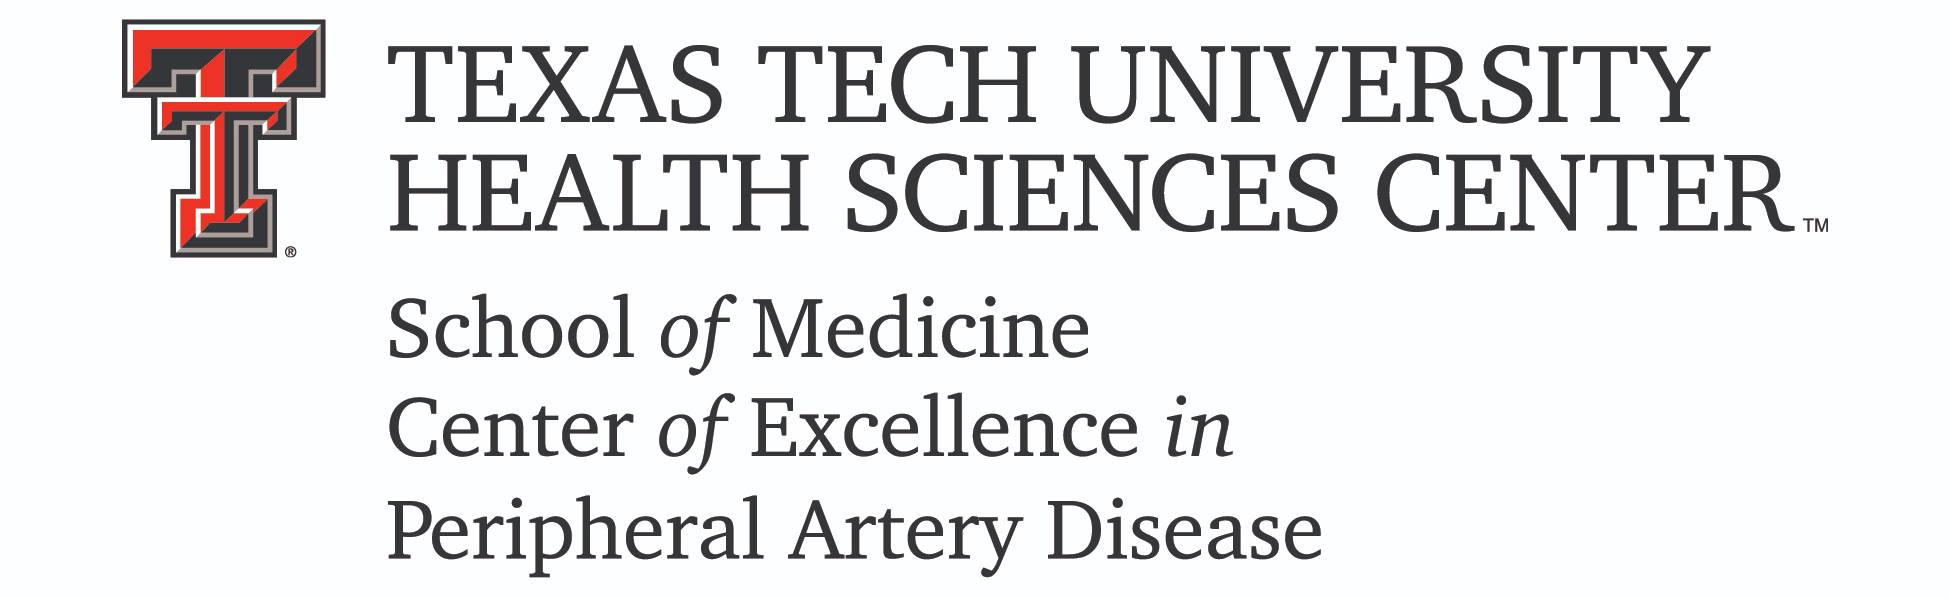 Center of Excellence in Peripheral Artery Disease